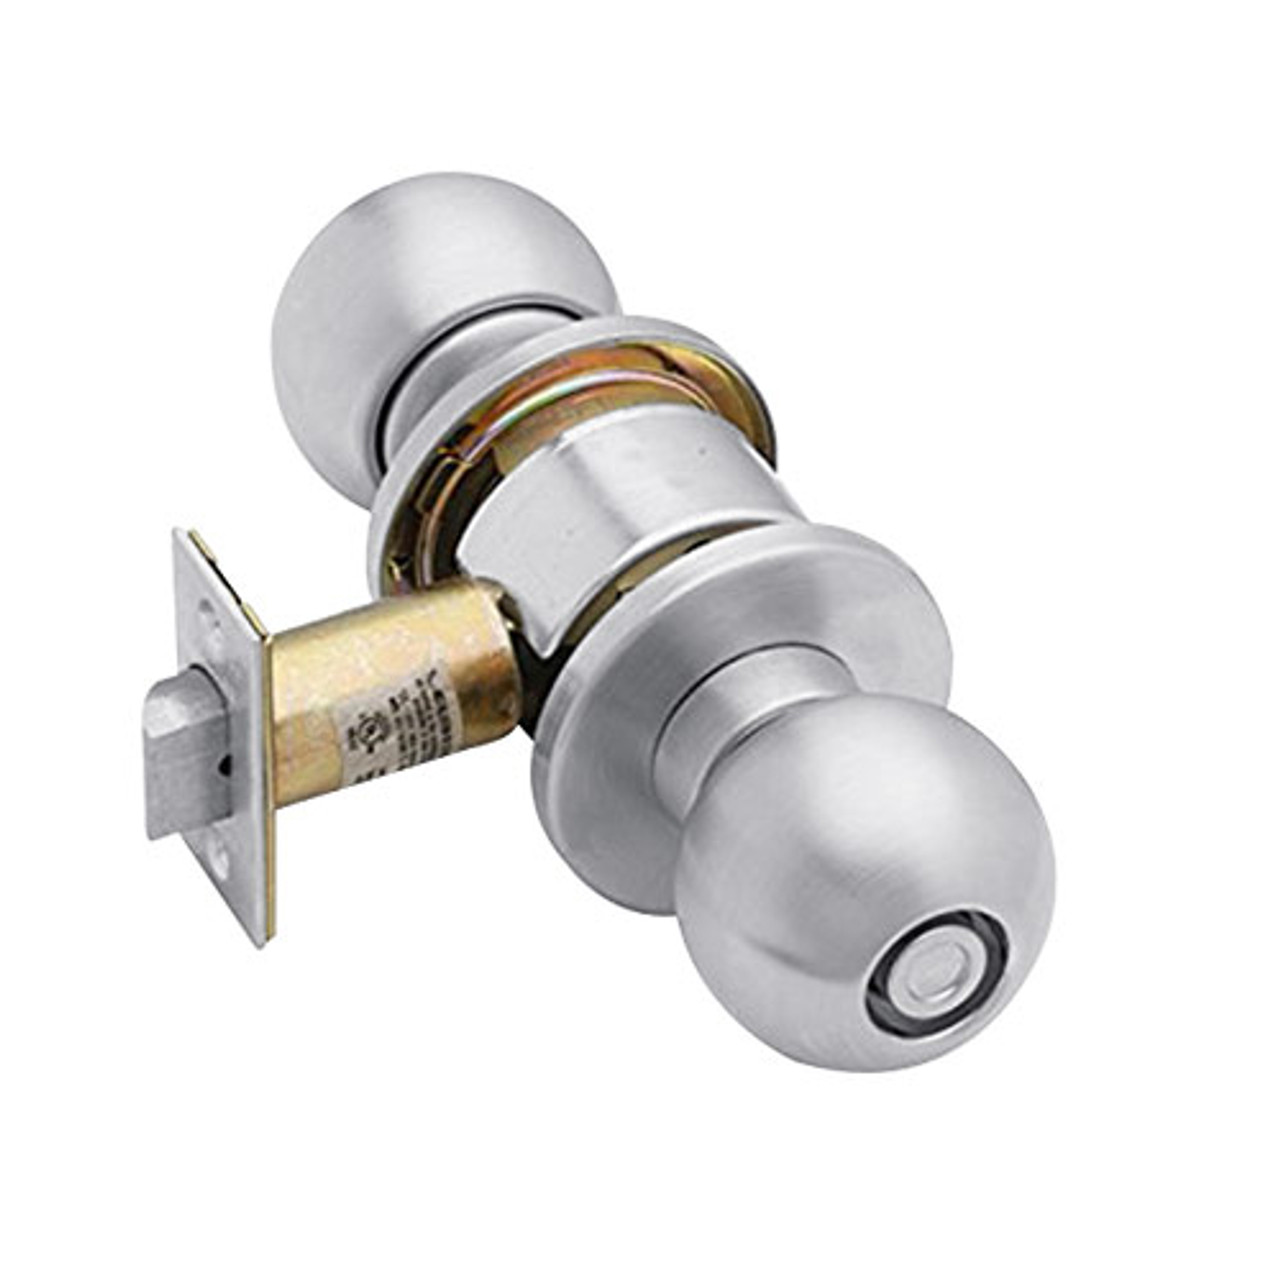 A40S-ORB-625 Schlage Orbit Commercial Cylindrical Lock in Bright Chromium Plated